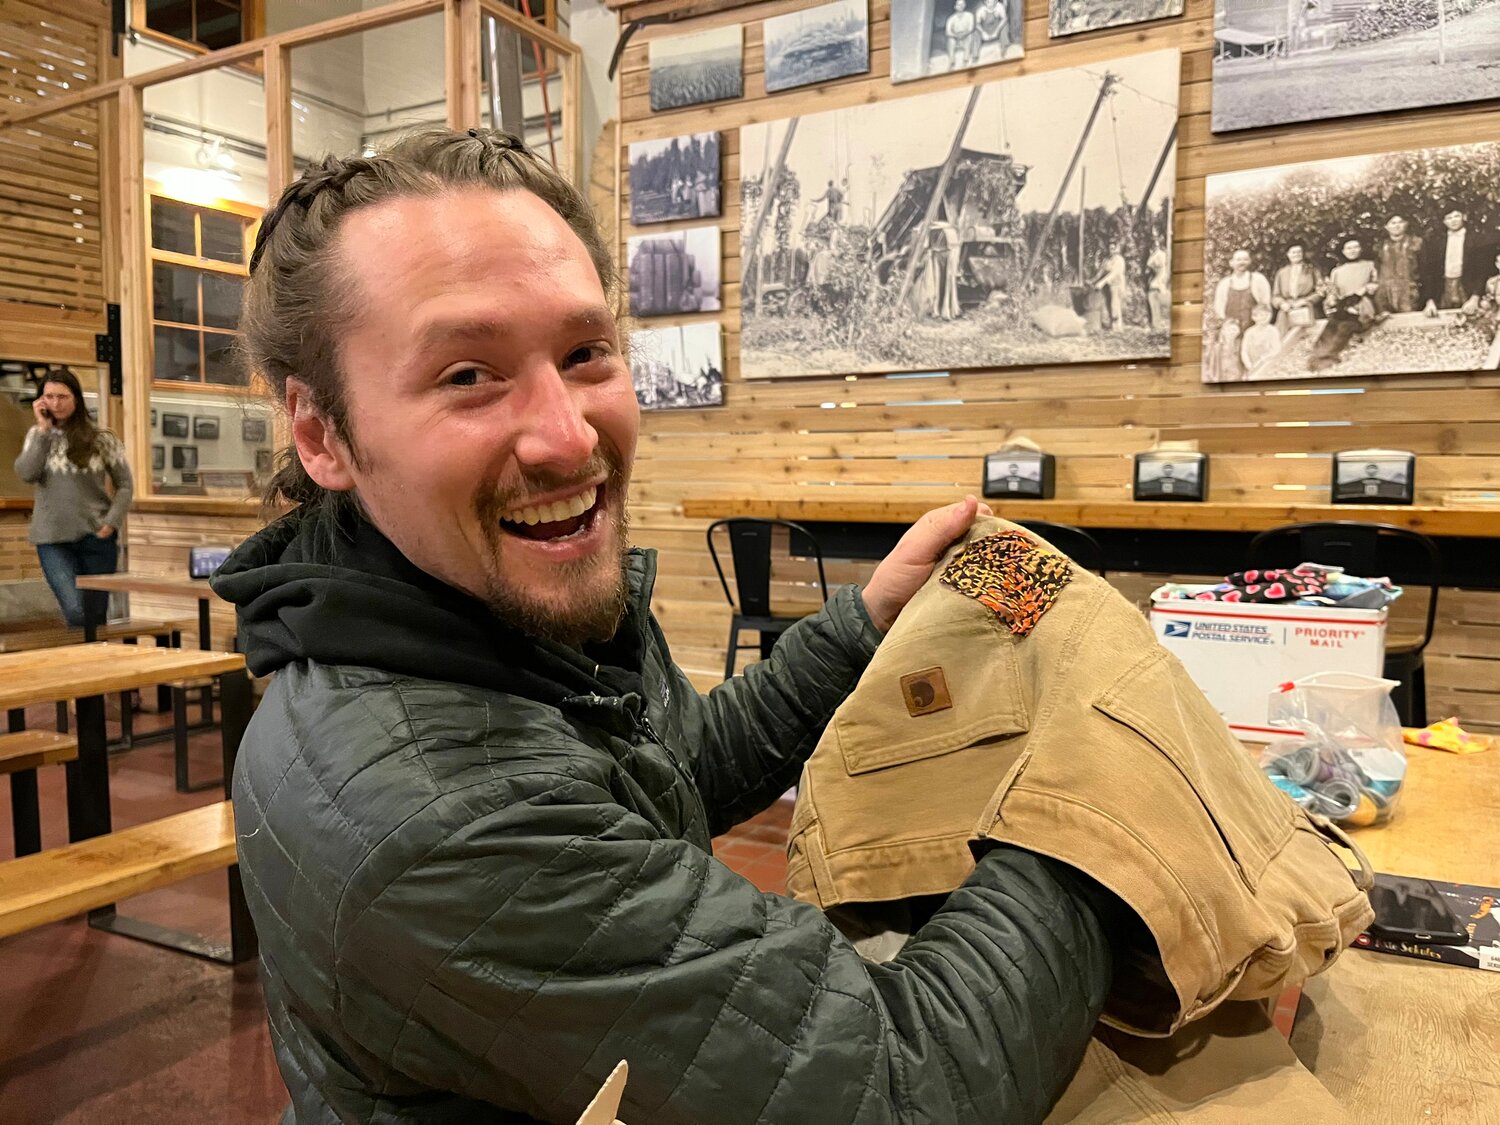 Repair Cafes teach people how to fix their own items. Jeremy Tremblay learned how to creatively mend a hole in his pants at one of Waste Loop’s previous events.